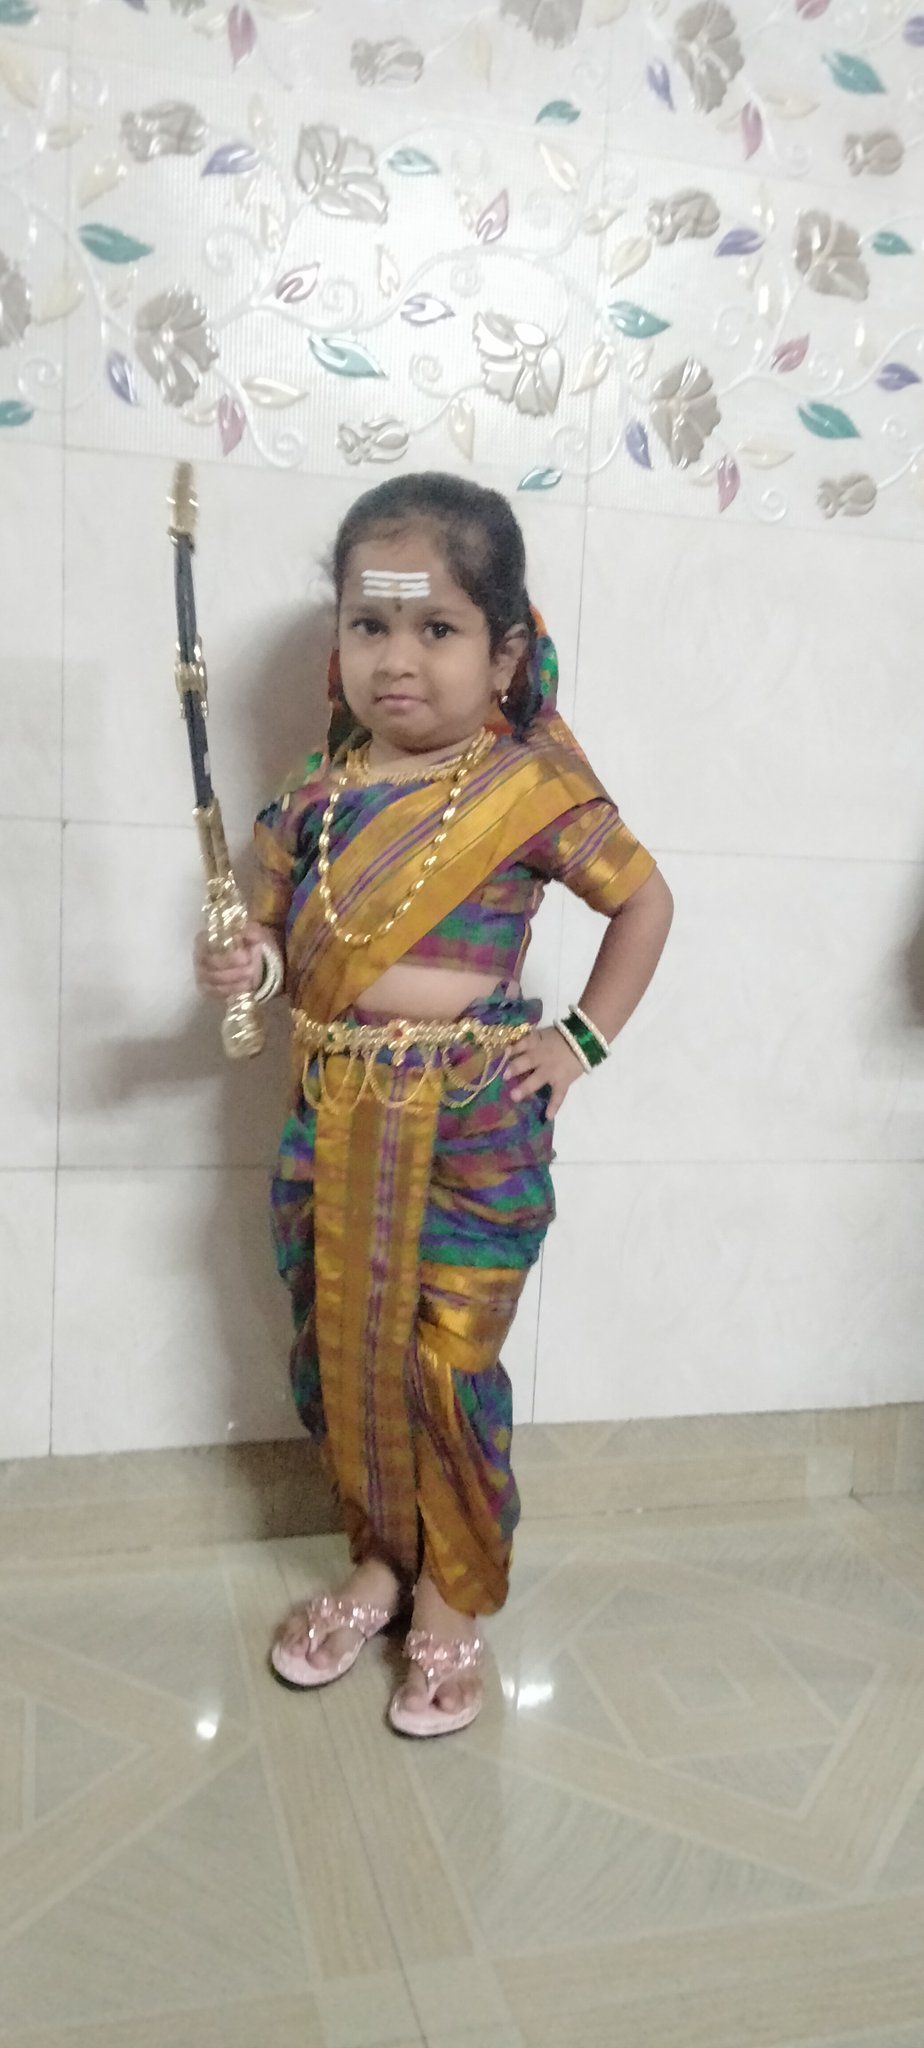 Fancy Dress Competition - Kittur Rani Chennamma | Submission for 2020  Independence Day Fancy Dress Competition - Saanvi Vasisht (Age 4) as Kittur  Rani Chennamma | By Sampige Triangle Kannada AssociationFacebook